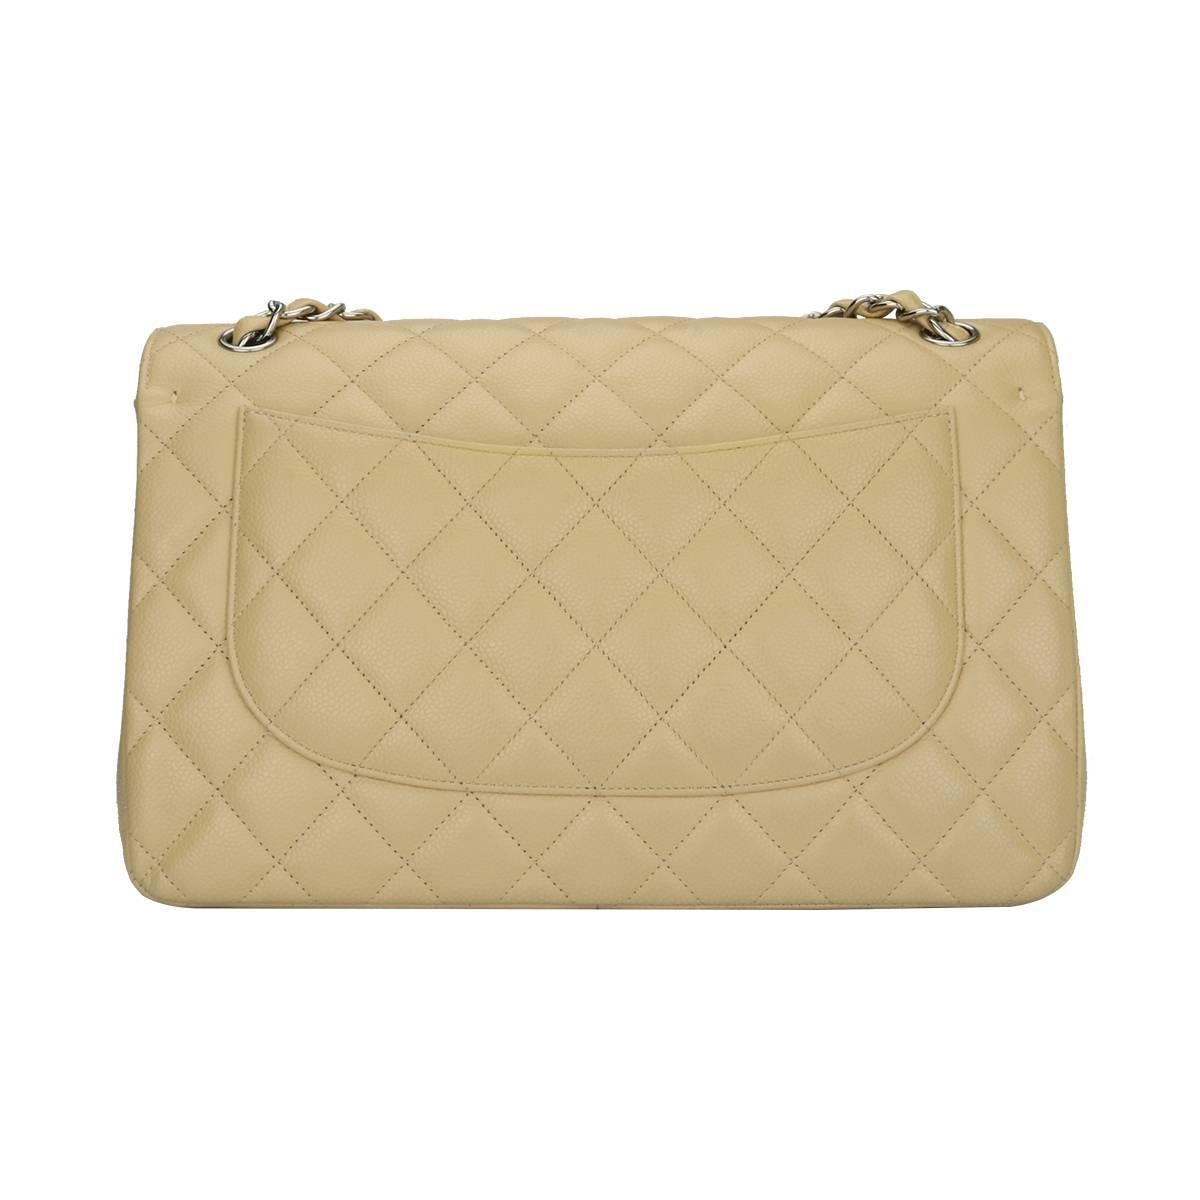 Women's or Men's CHANEL Double Flap Jumbo Bag Beige Clair Caviar with Silver Hardware 2013